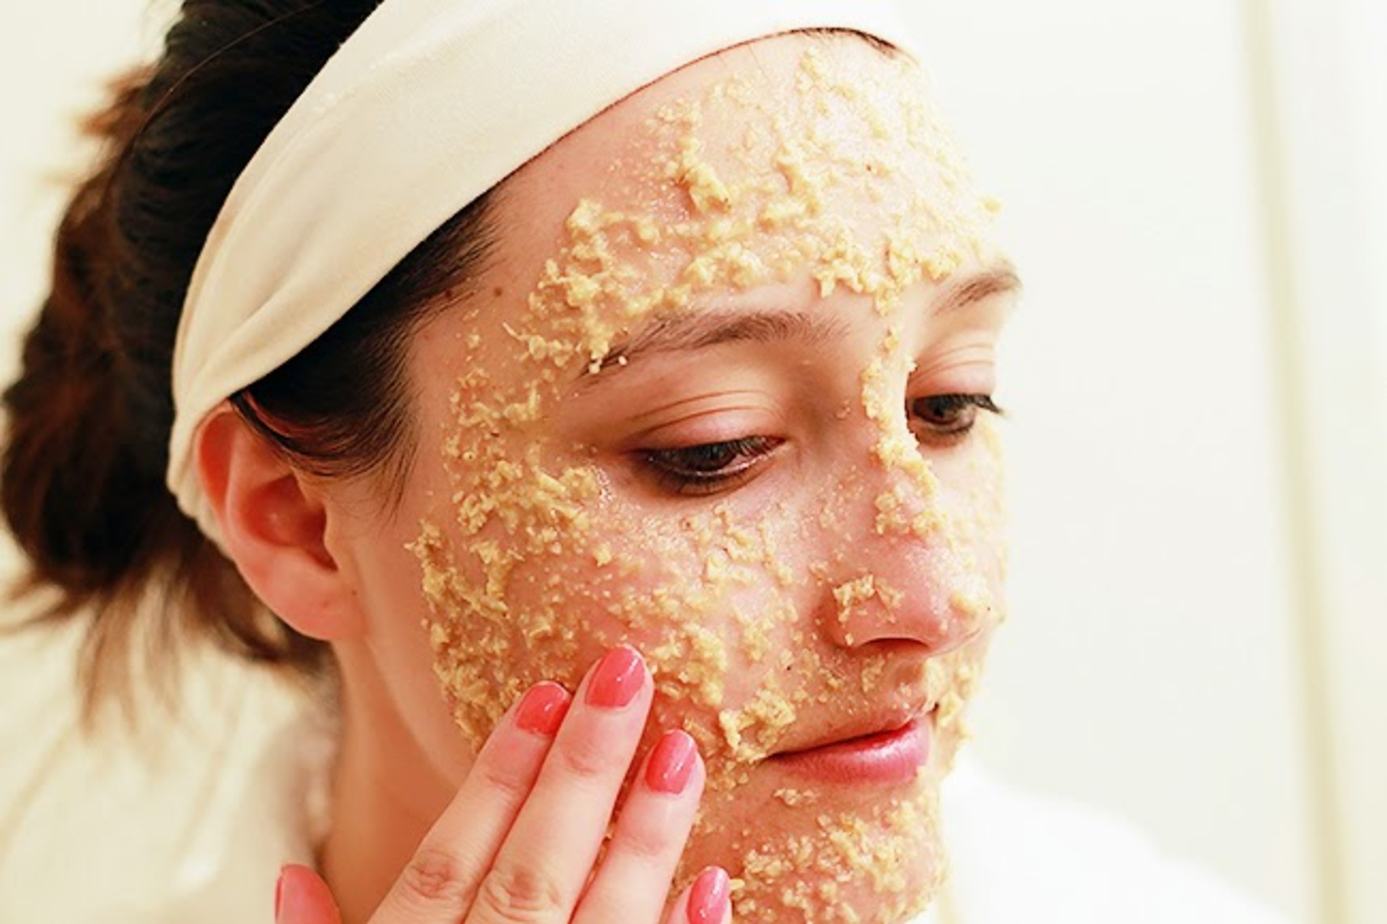 Oatmeal mask for oily skin